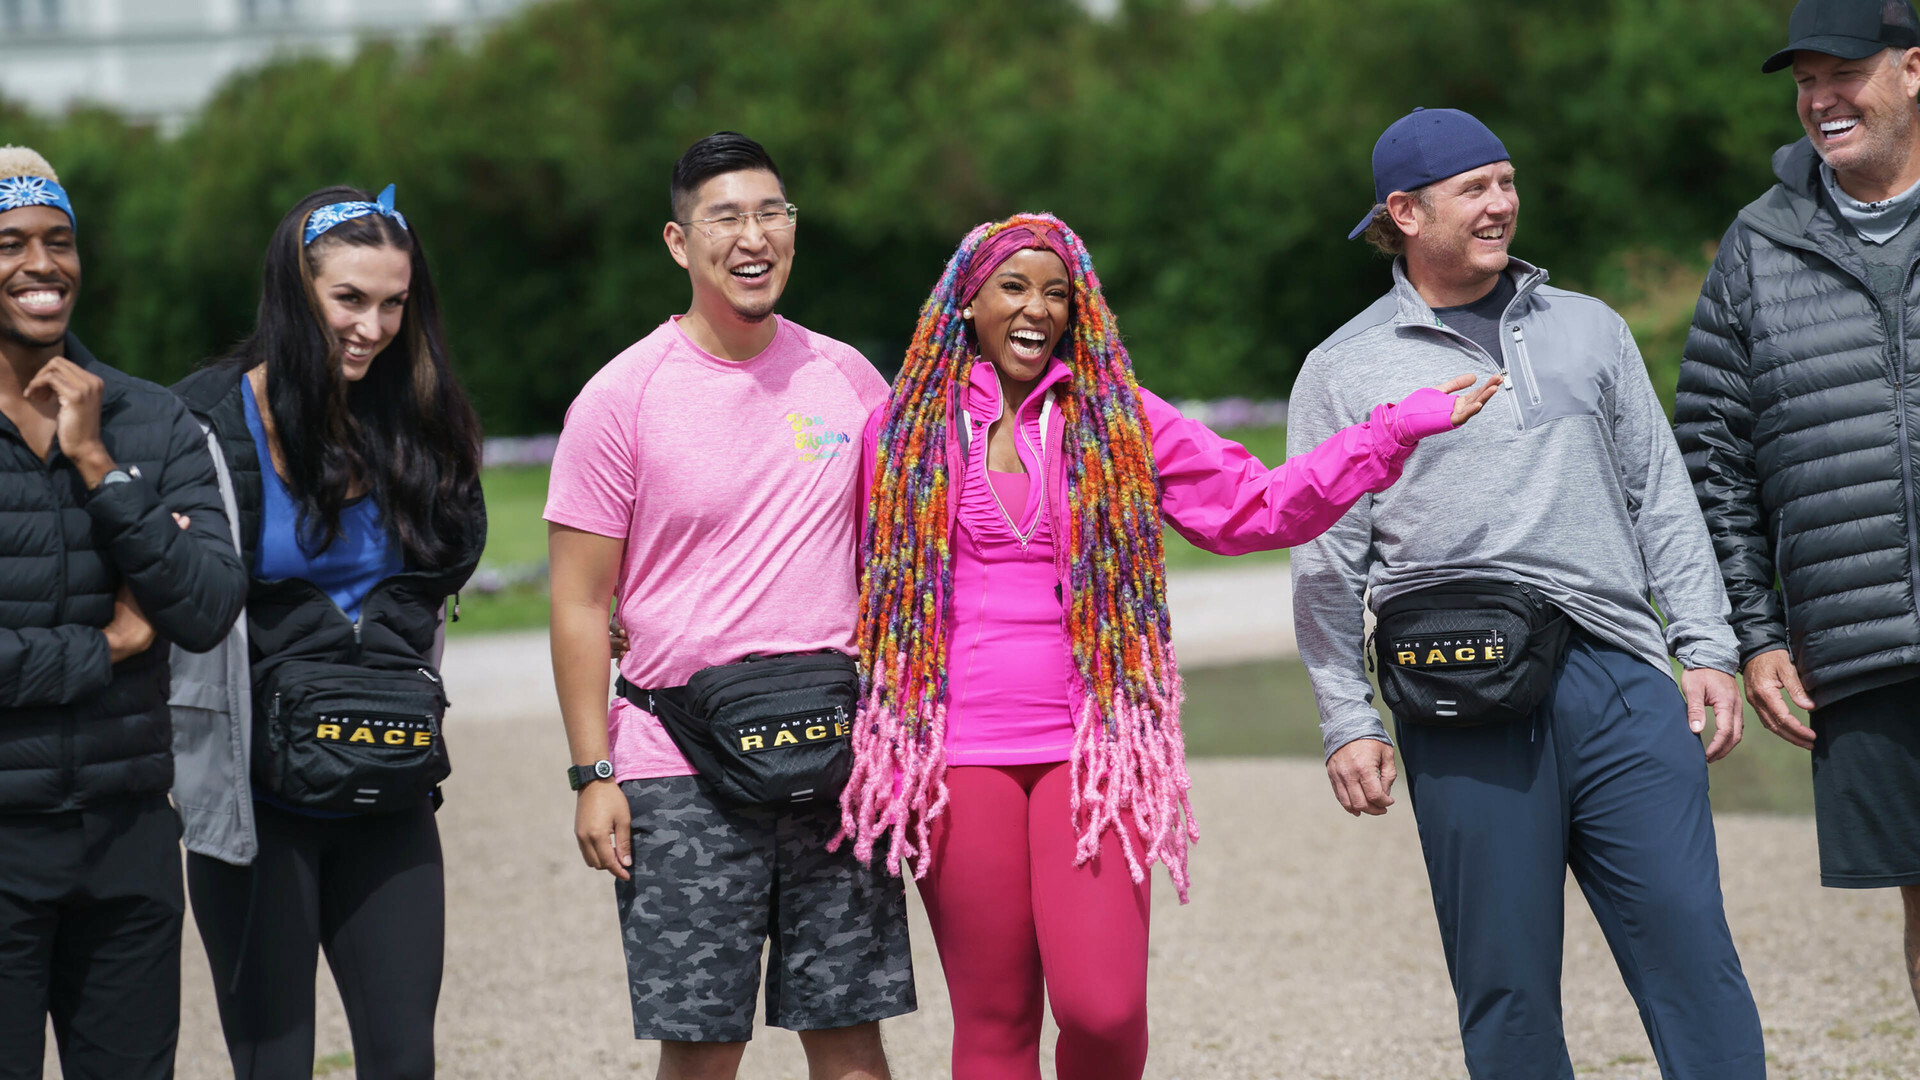 Watch The Amazing Race Season 34 Episode 1 Many Firsts But Don't Be